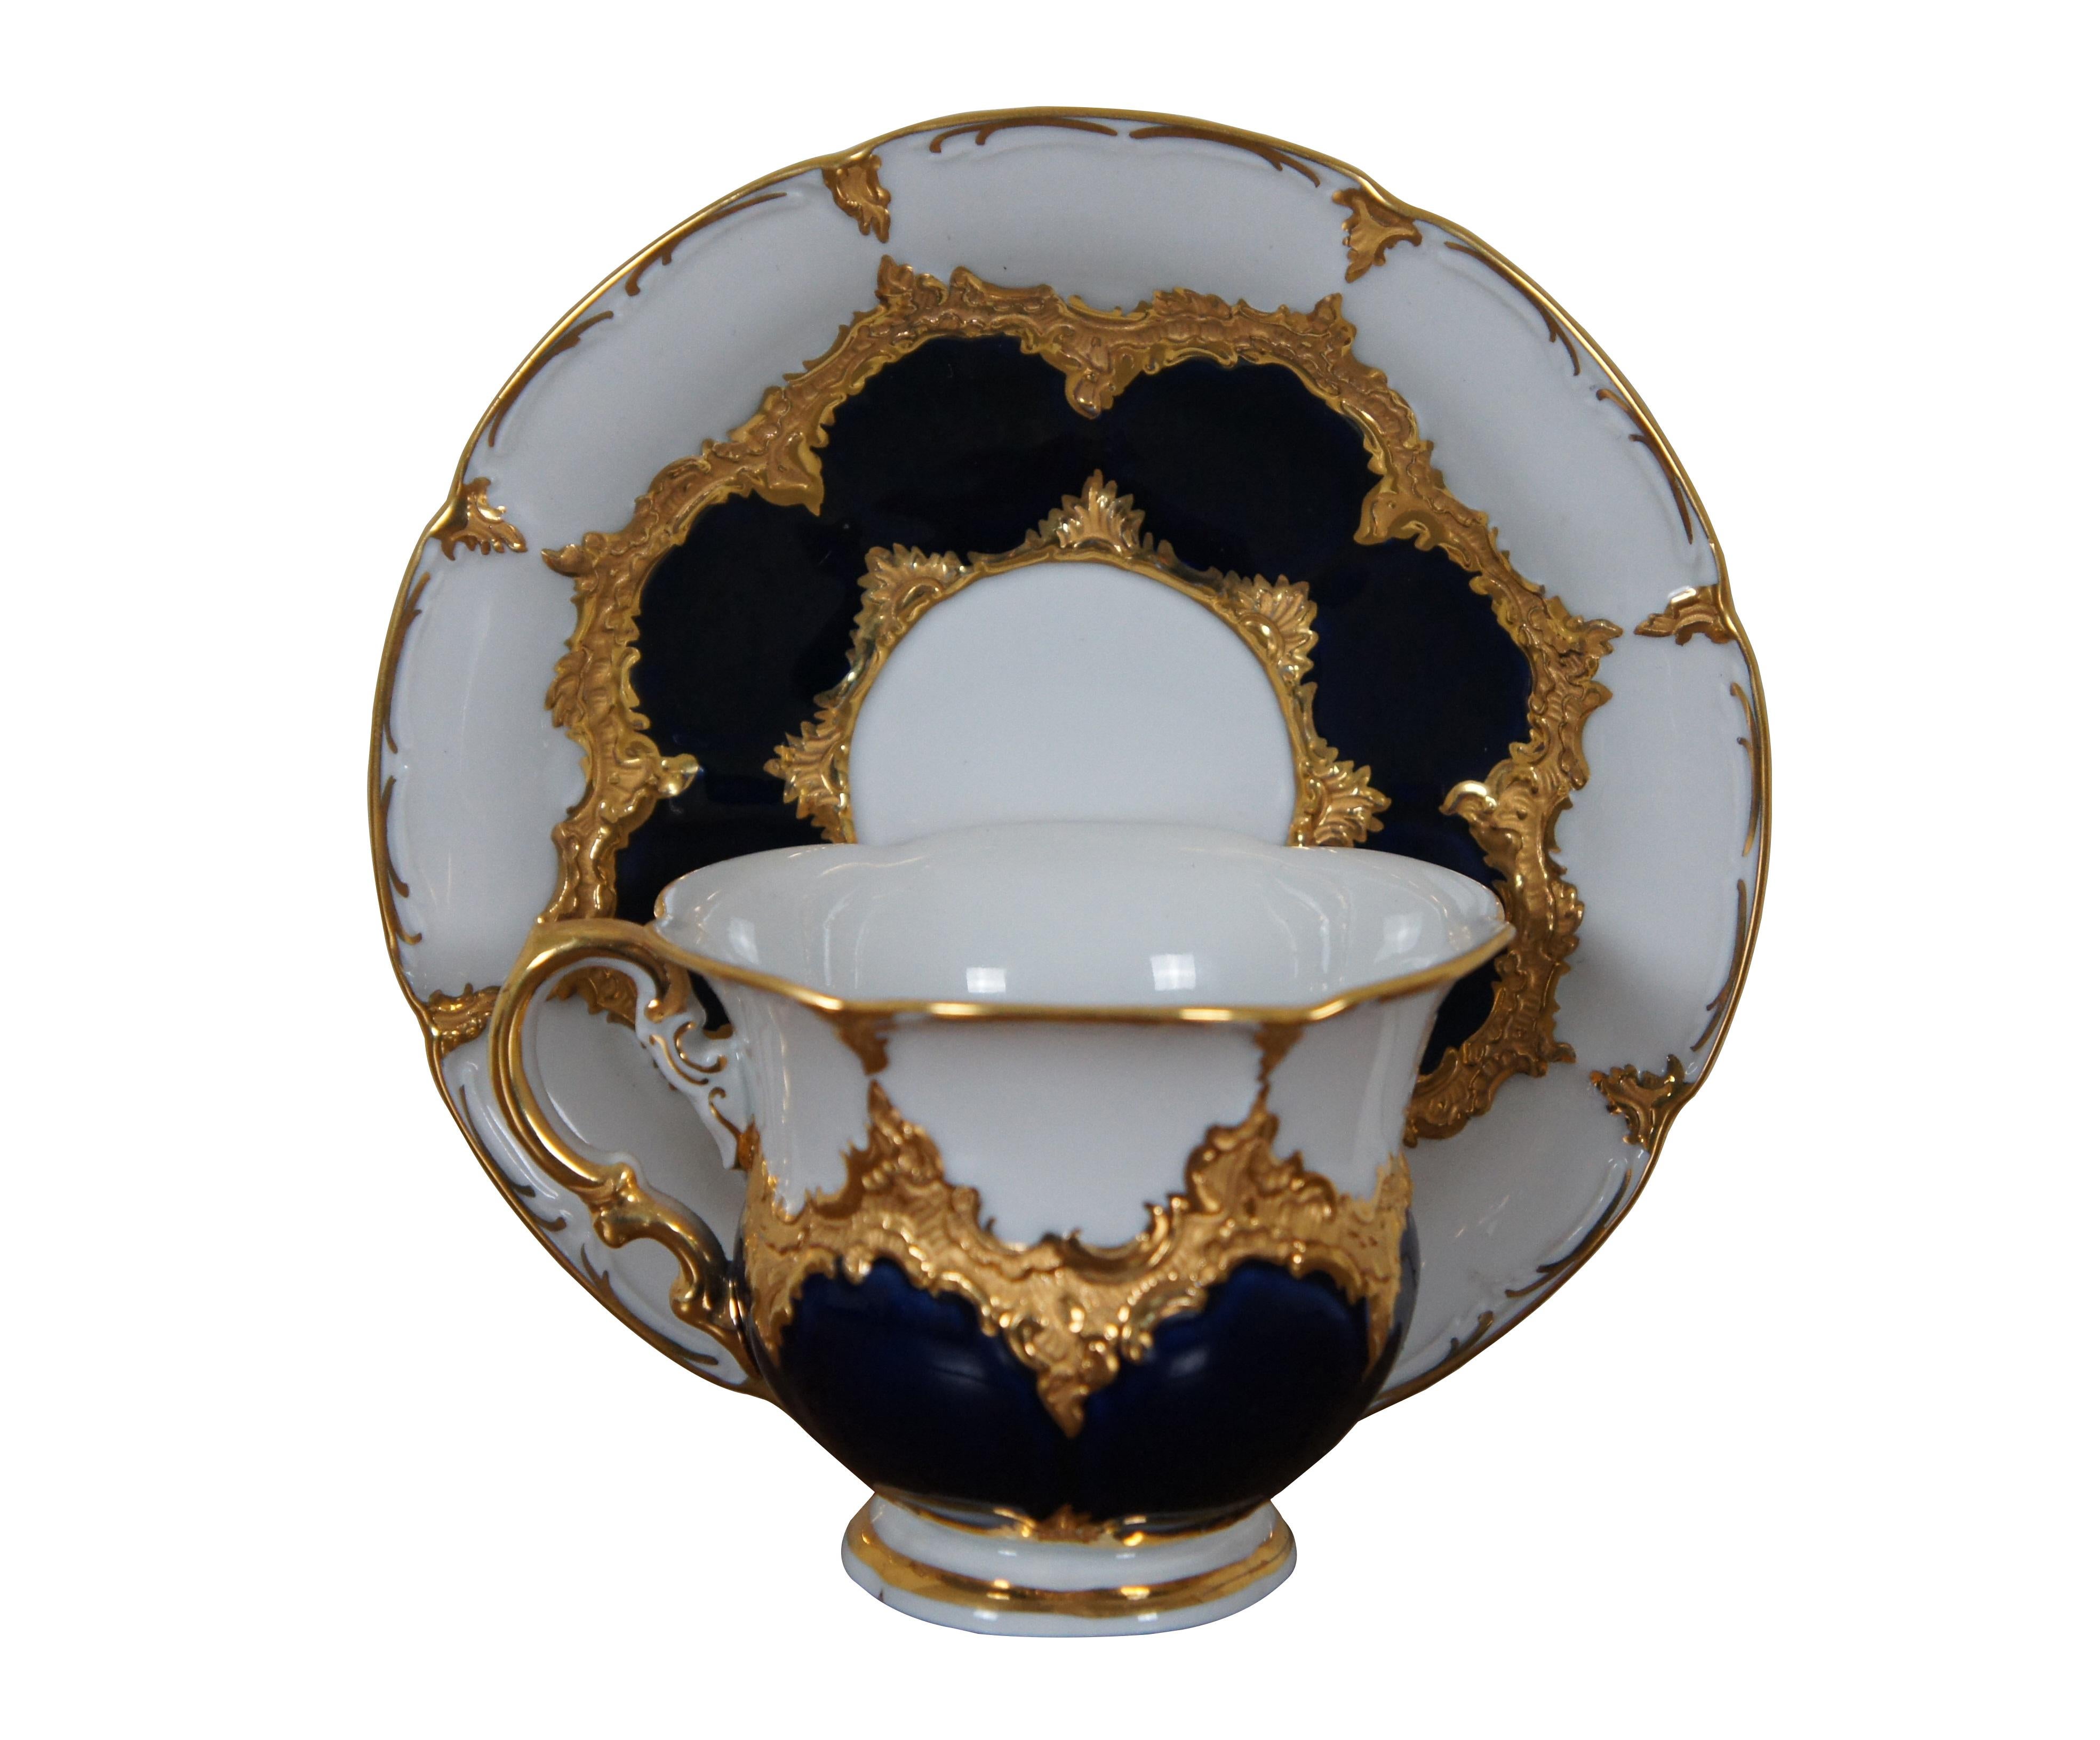 MEISSEN mocha/espresso cup with saucer, ¨B-Form¨, cobalt blue and white background with rich gold decoration and sword mark

Circa 1825-1924

